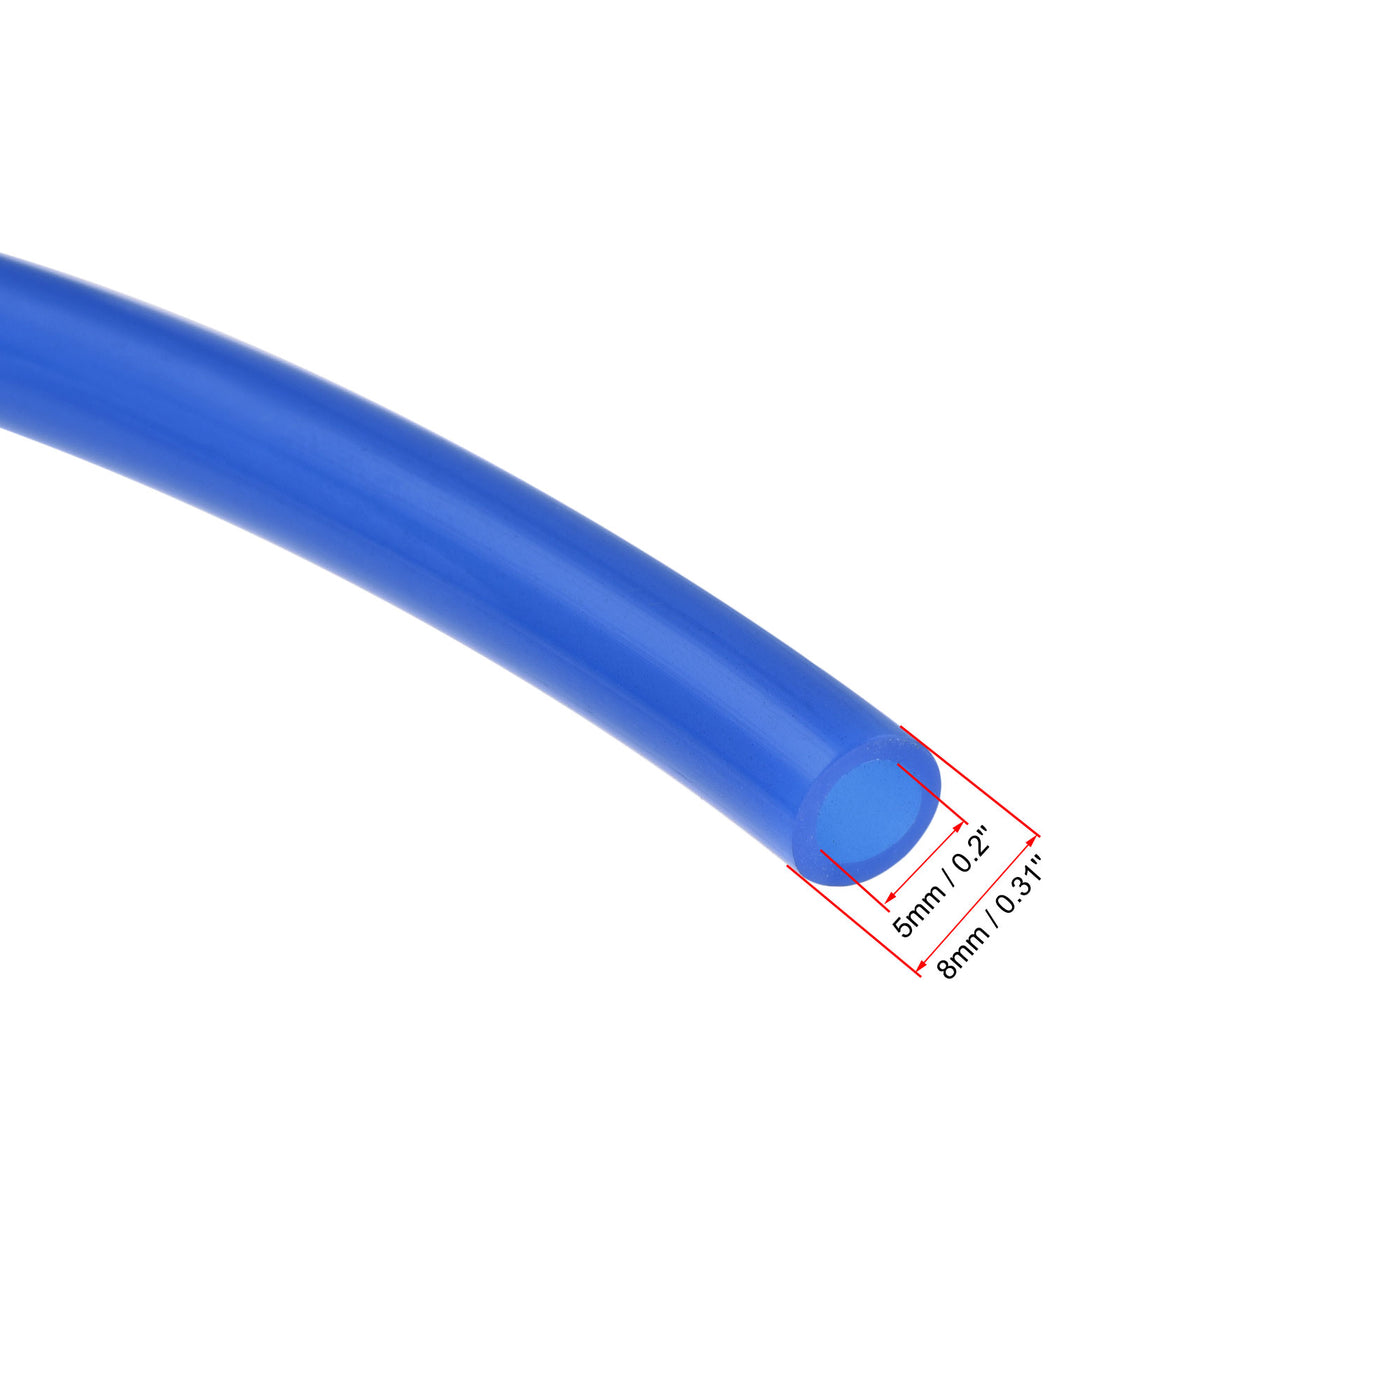 uxcell Uxcell Pneumatic 8mm OD PU Air Tubing Kit Hose Air Line Tubing 10M Blue with Push to Connect Fittings